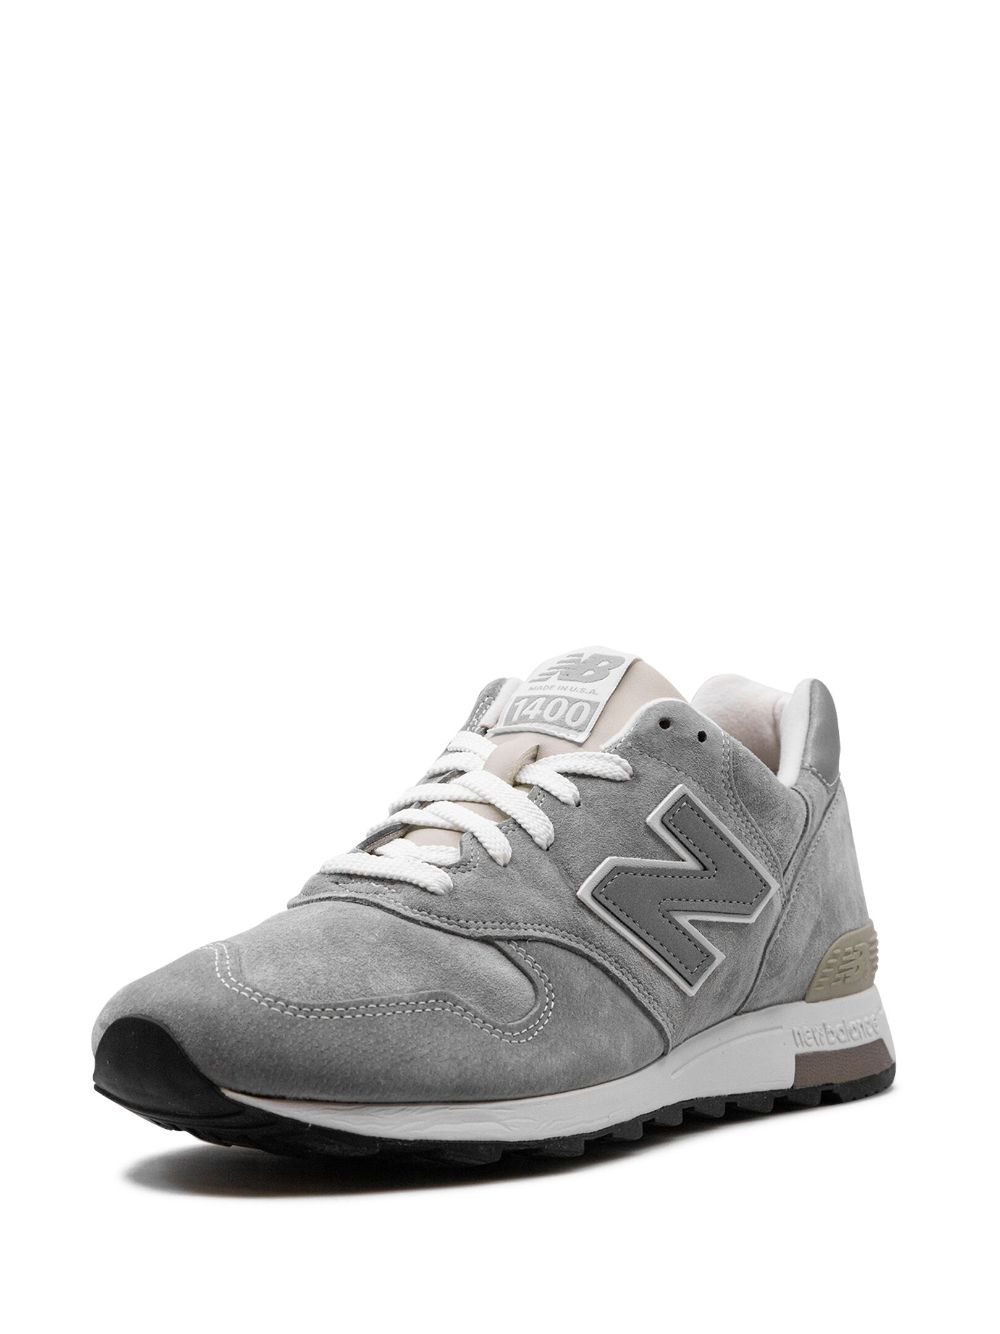 Shop New Balance 1400 "grey" Suede Sneakers